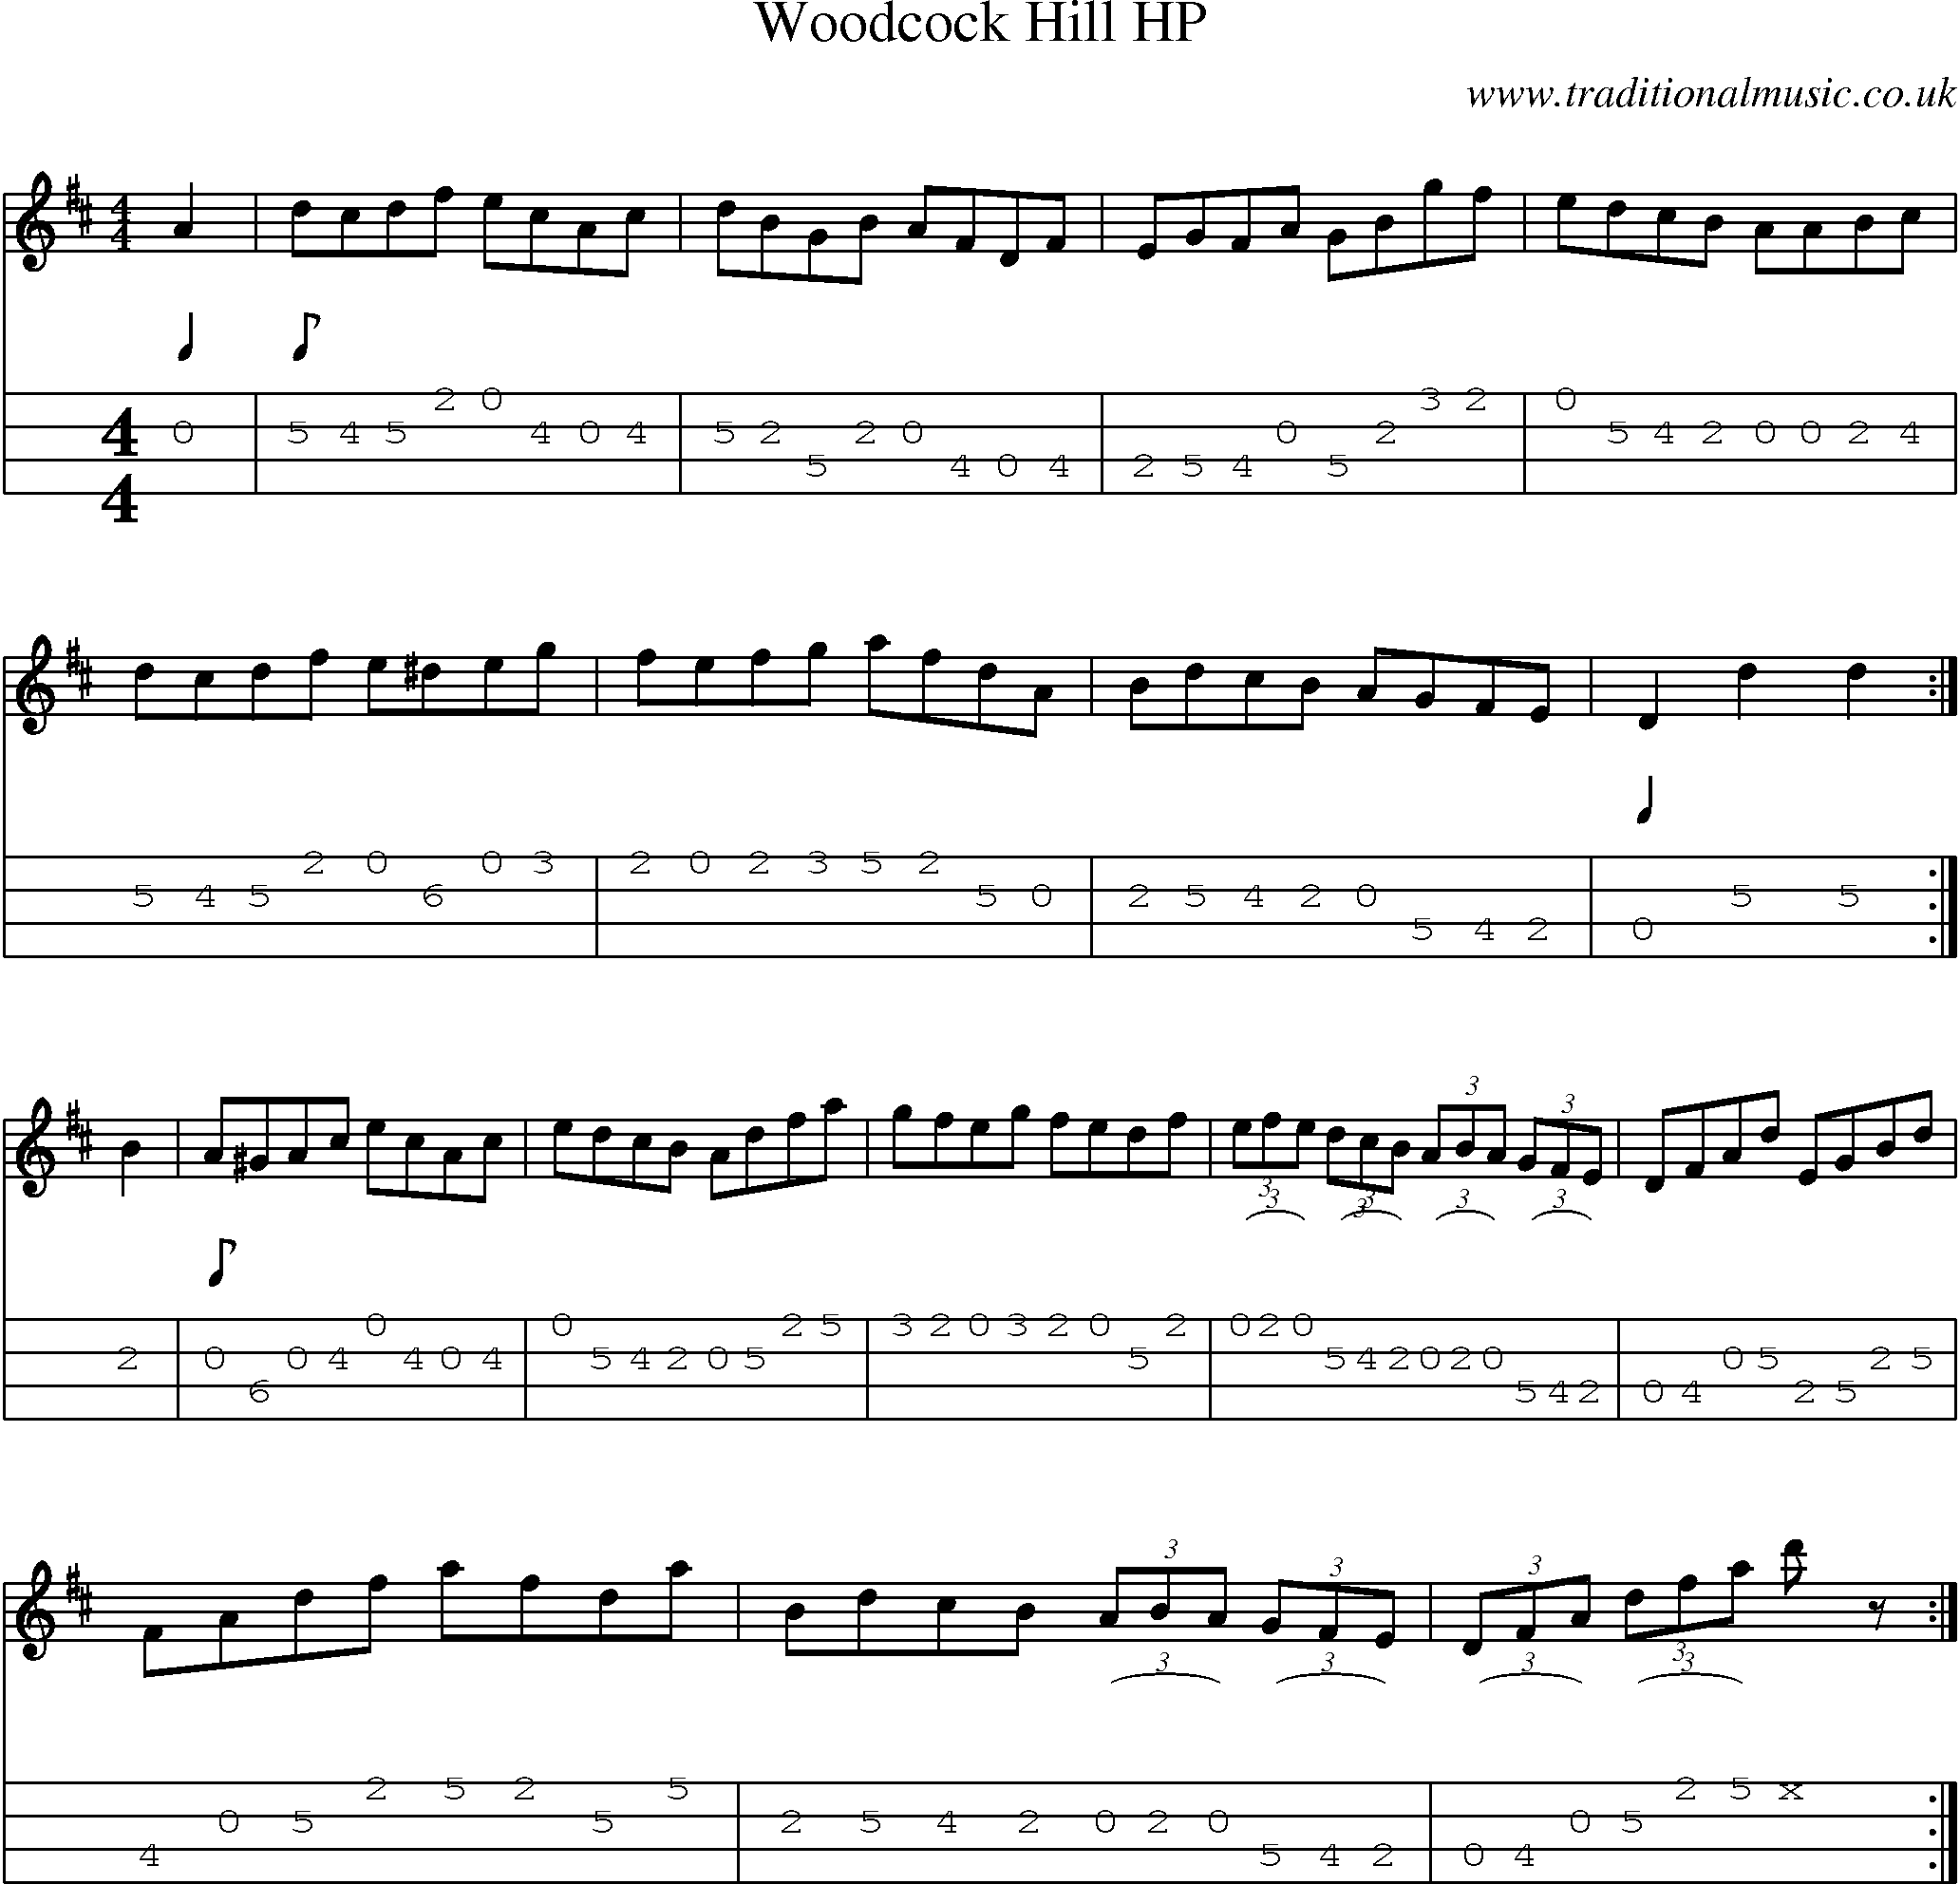 Music Score and Mandolin Tabs for Woodcock Hill